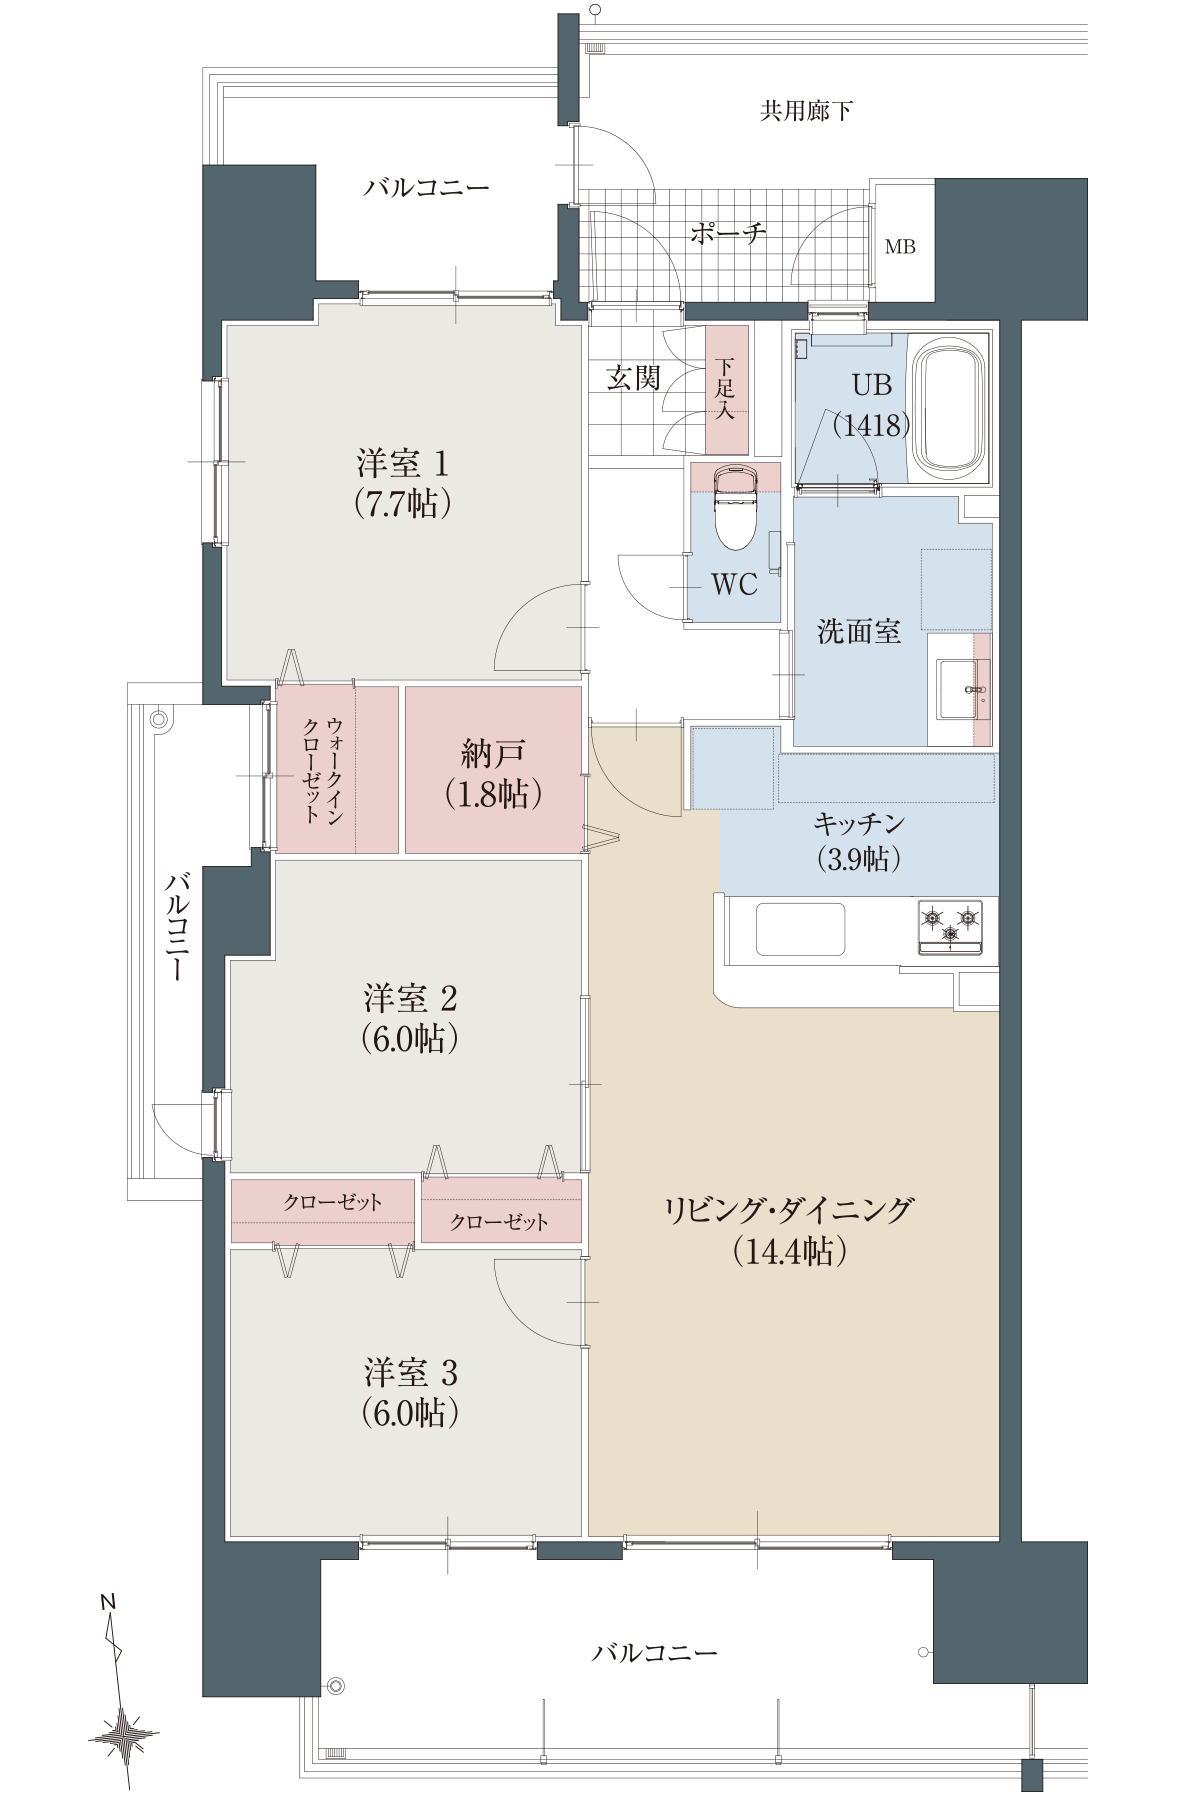 Aタイプ基本間取図